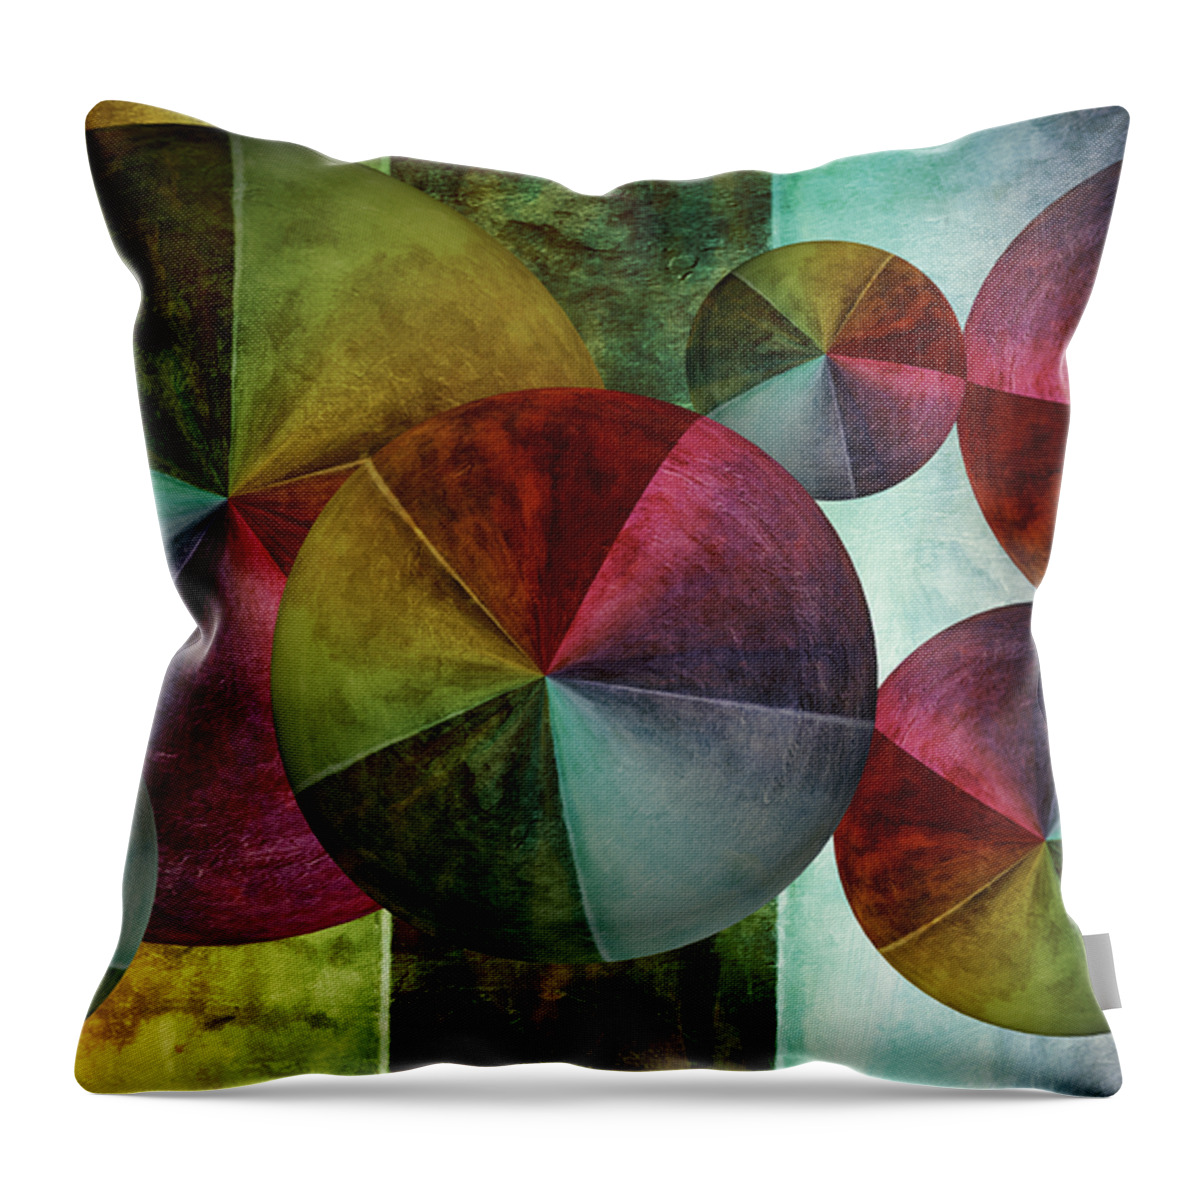 Abstract Throw Pillow featuring the digital art 5 Wind Worlds by Angelina Tamez